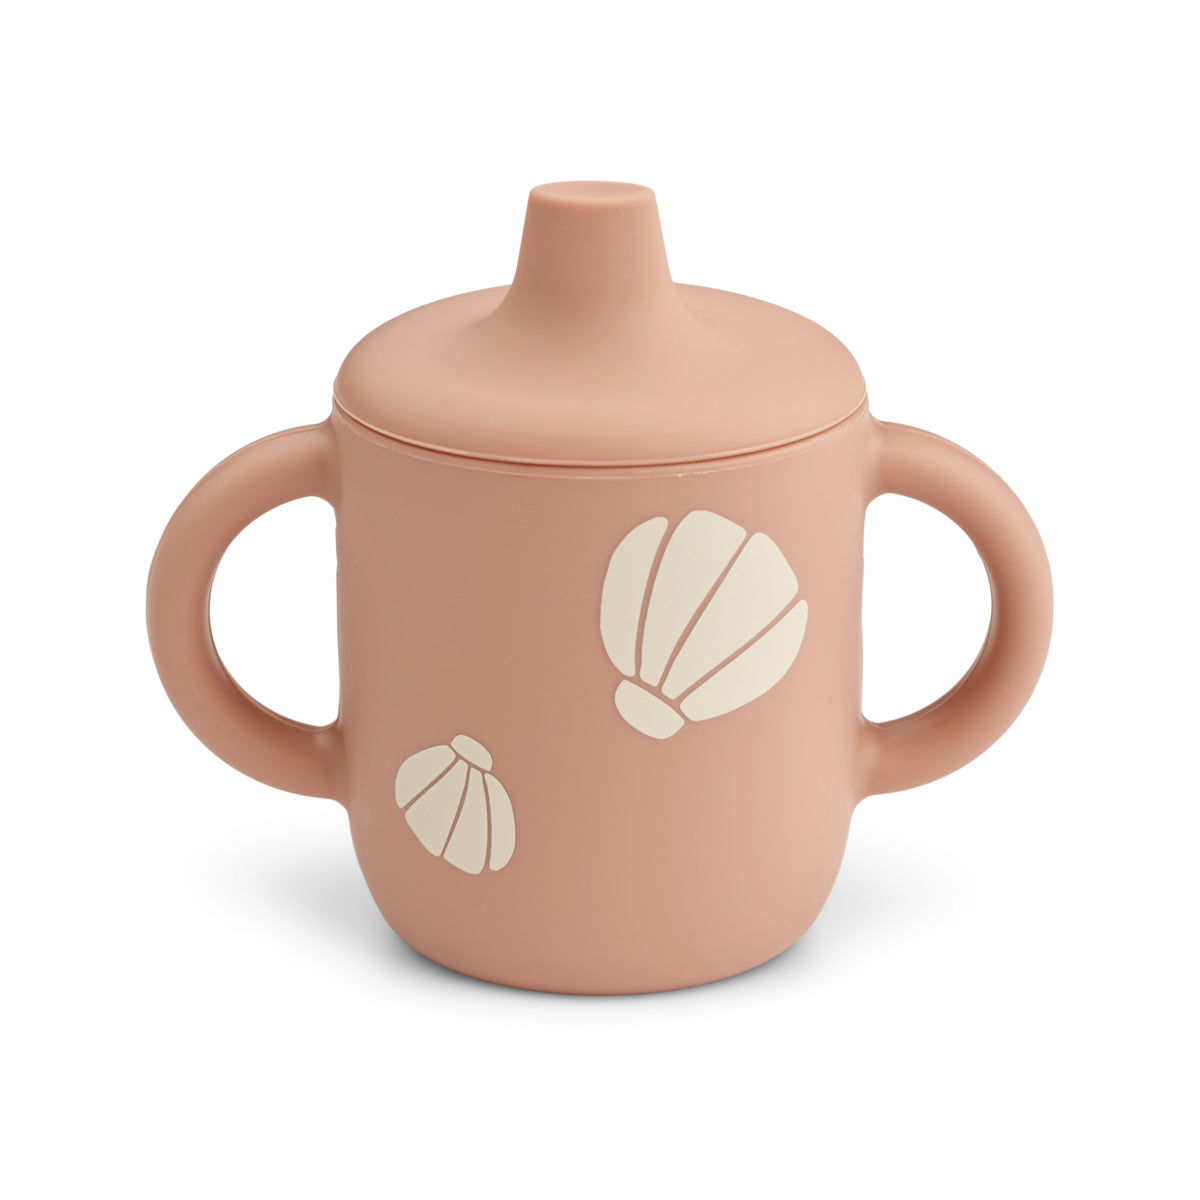 LIEWOOD Neil Sippy Cup,Shell/Pale Tuscany Fersken